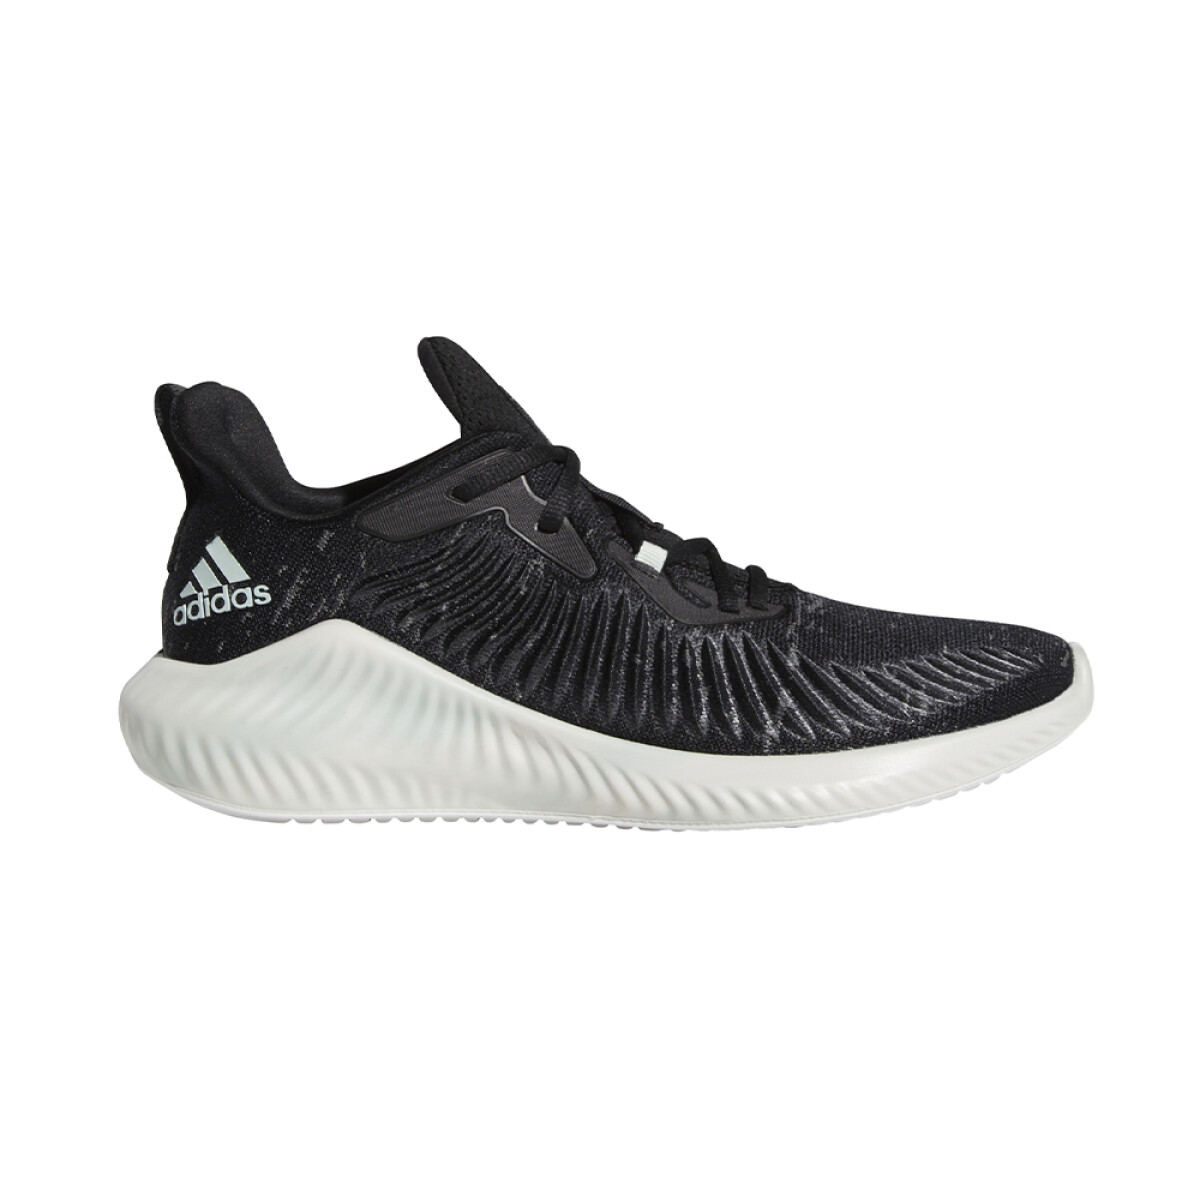 adidas AlphaBounce+ Parley M - CORE BLACK 